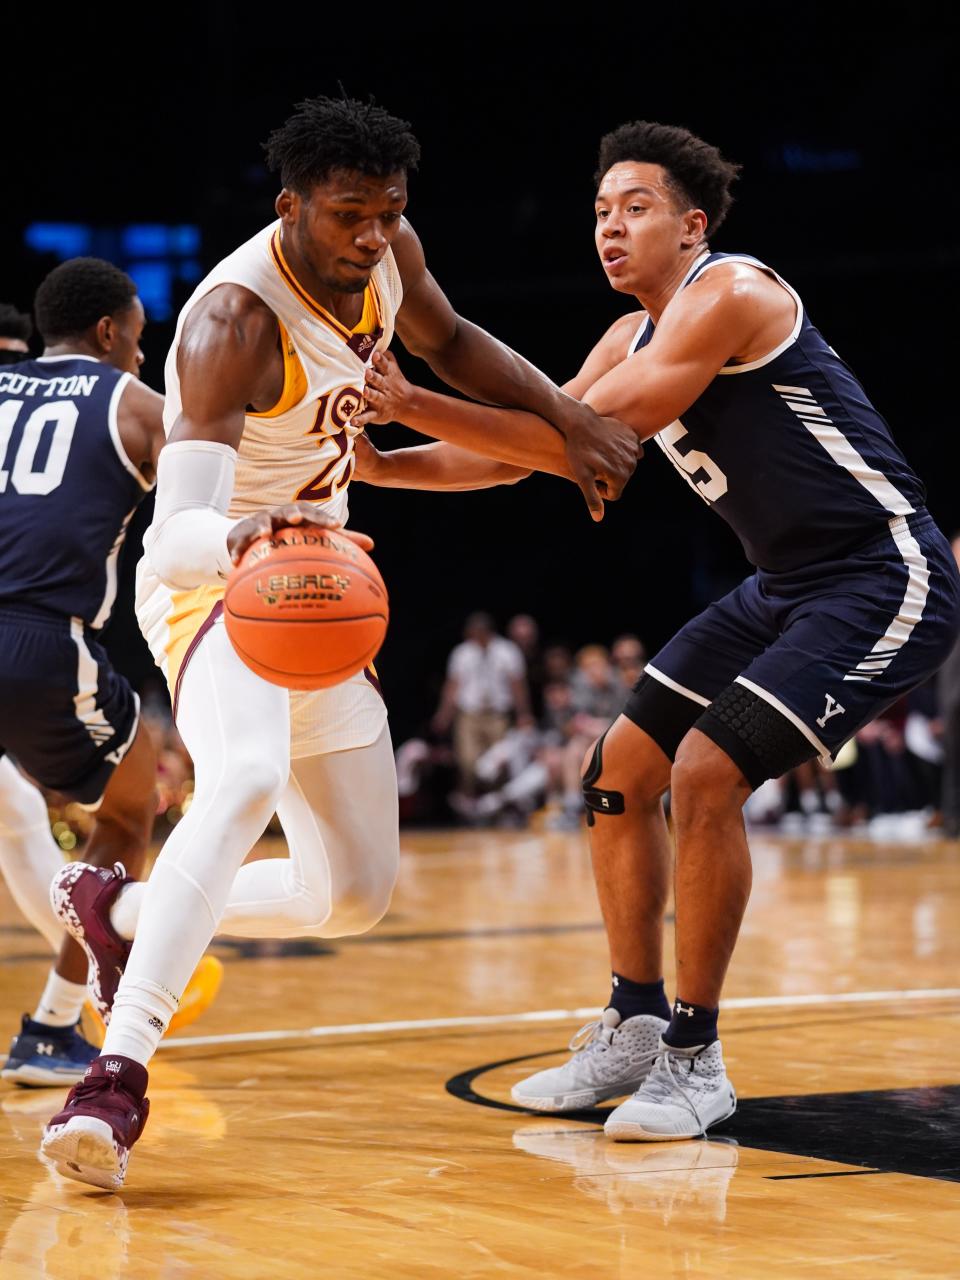 Iona's Nelly Junior Joseph attempts to drive inside during the Gaels' 91-77 win over Yale at the Barclays Center on Sunday, Dec. 12, 2021.